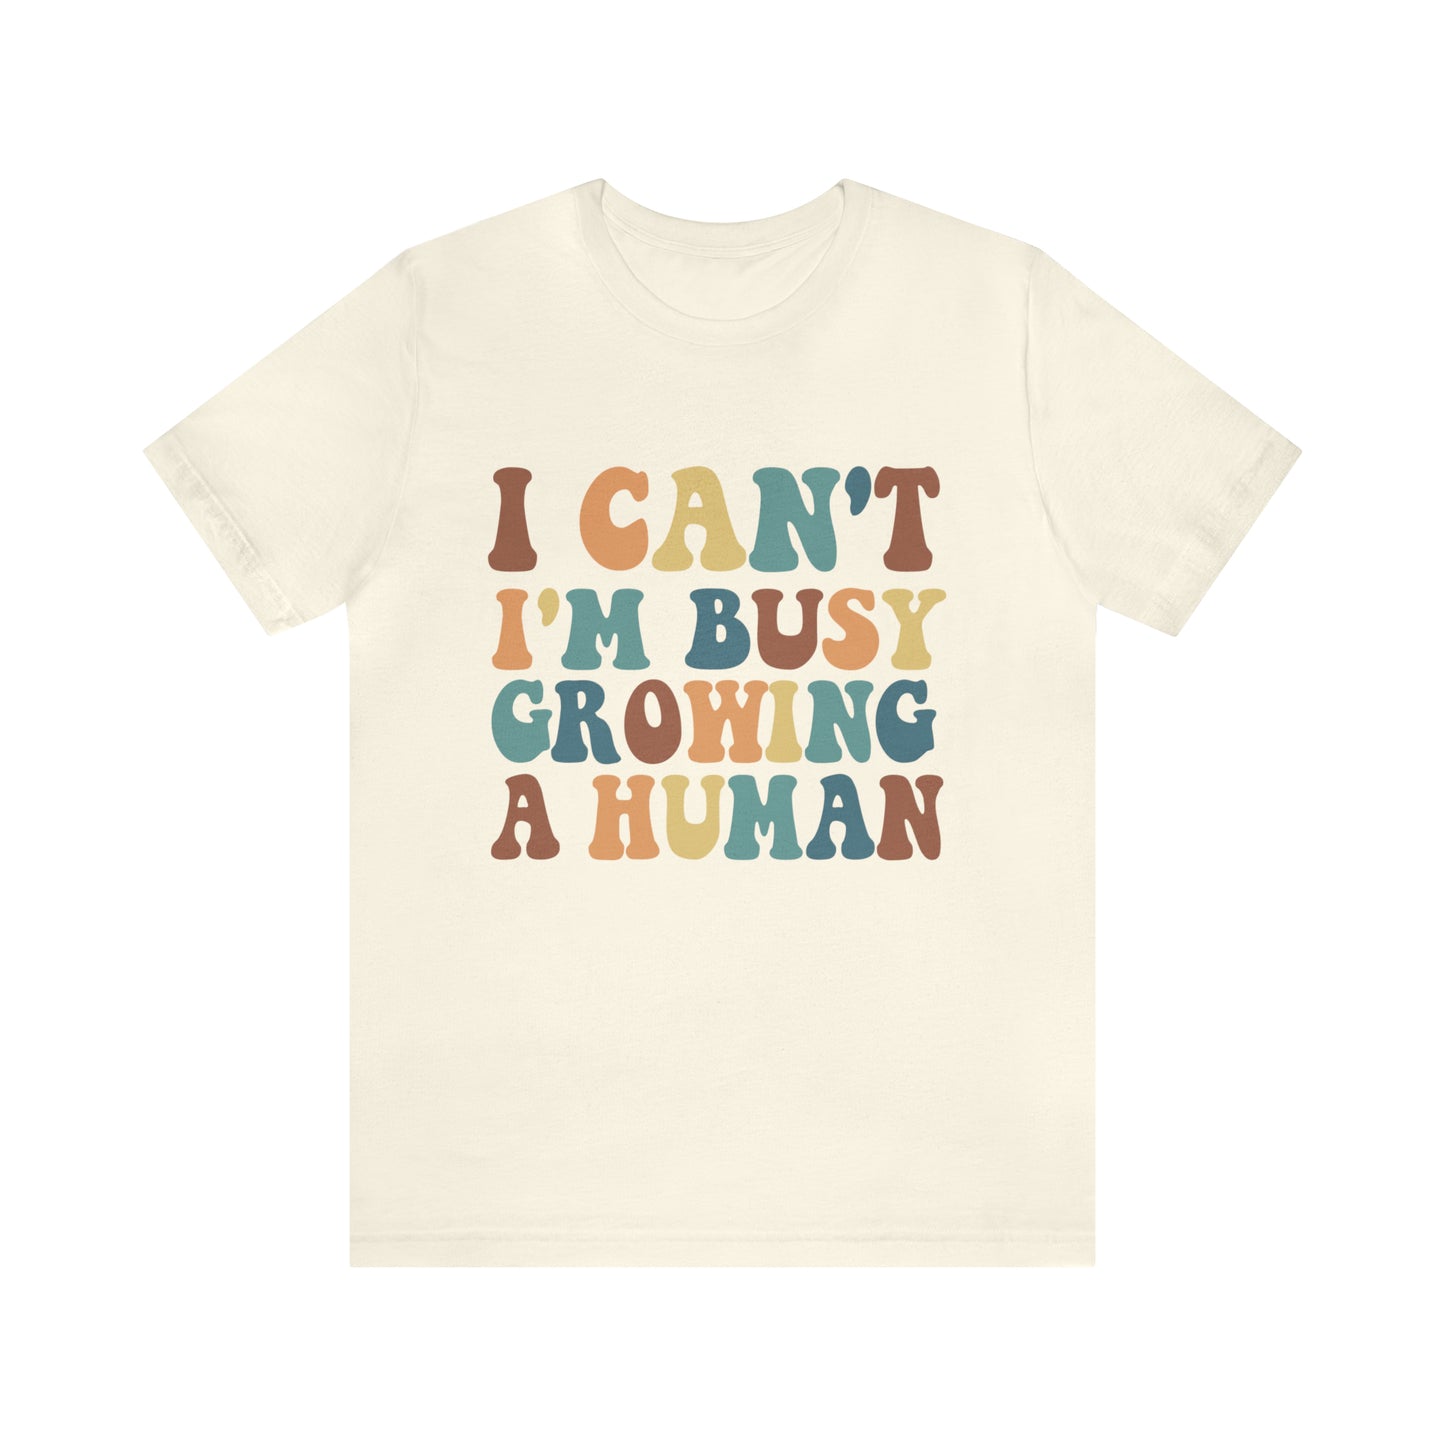 "I Cant, I'm Busy Growing A Human" Bella Canvas Short Sleeve Tee